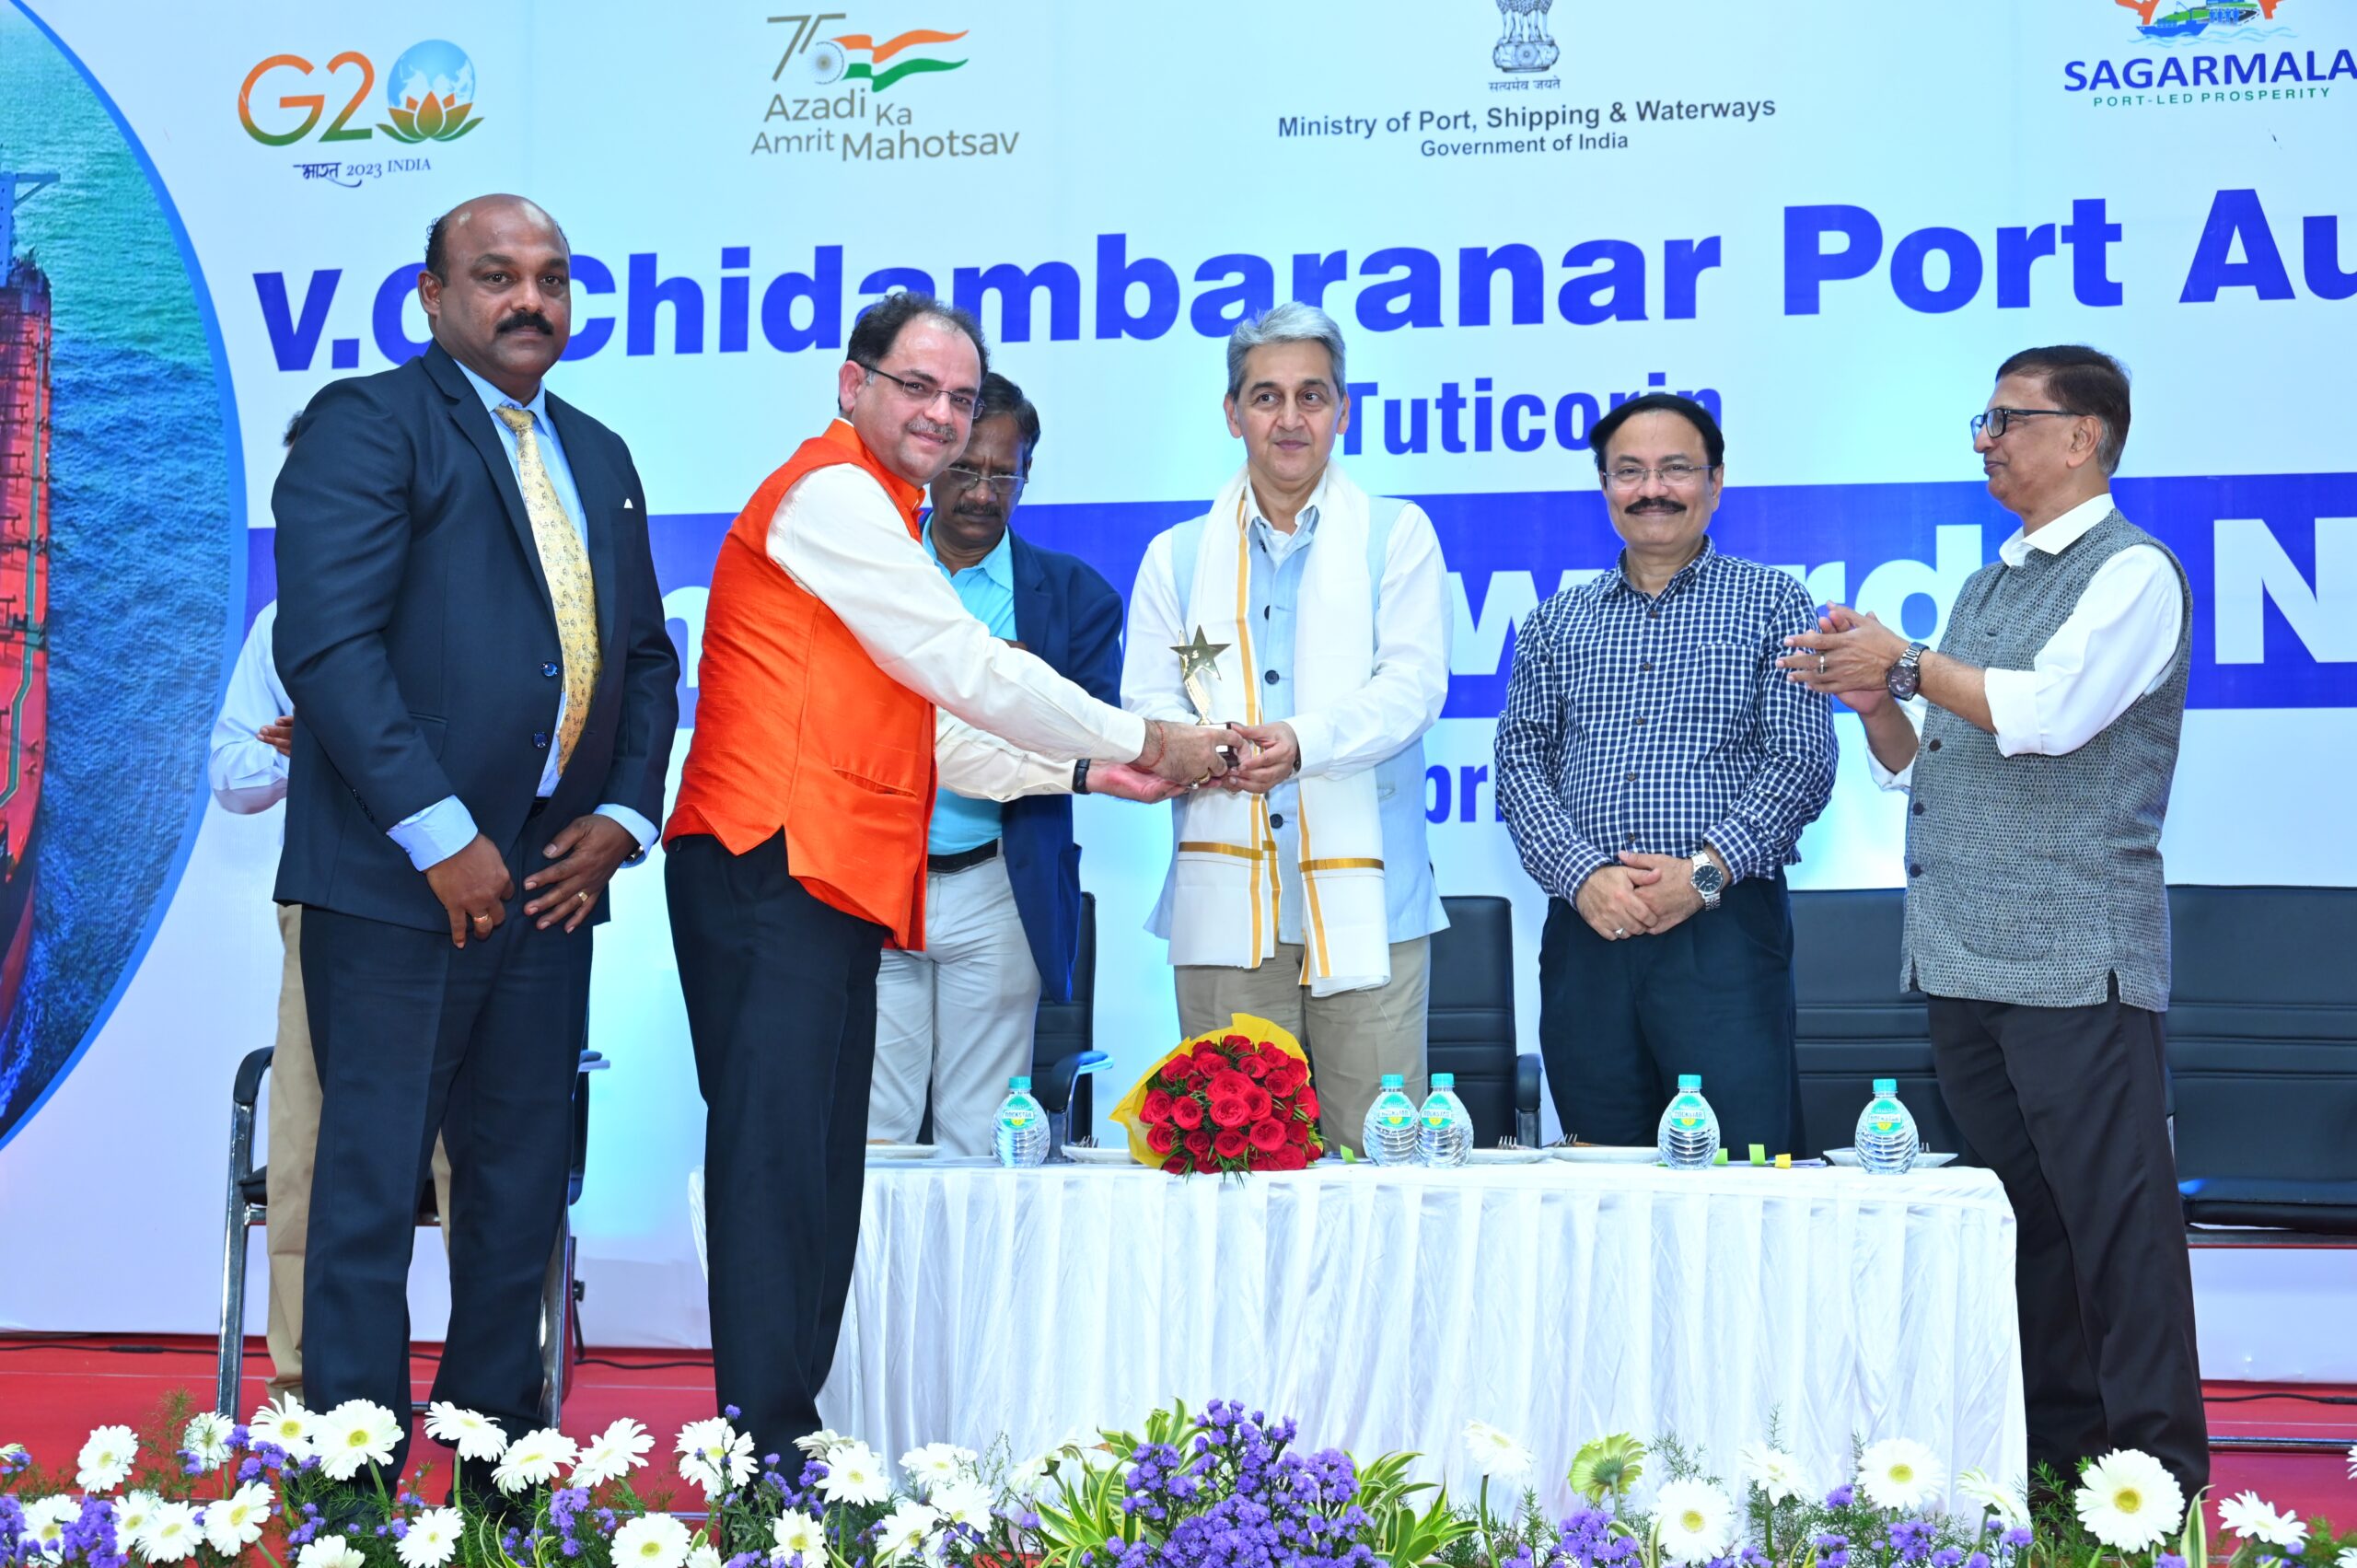 V. O. Chidambaranar Port Authority : Excellence as Business Support Partner